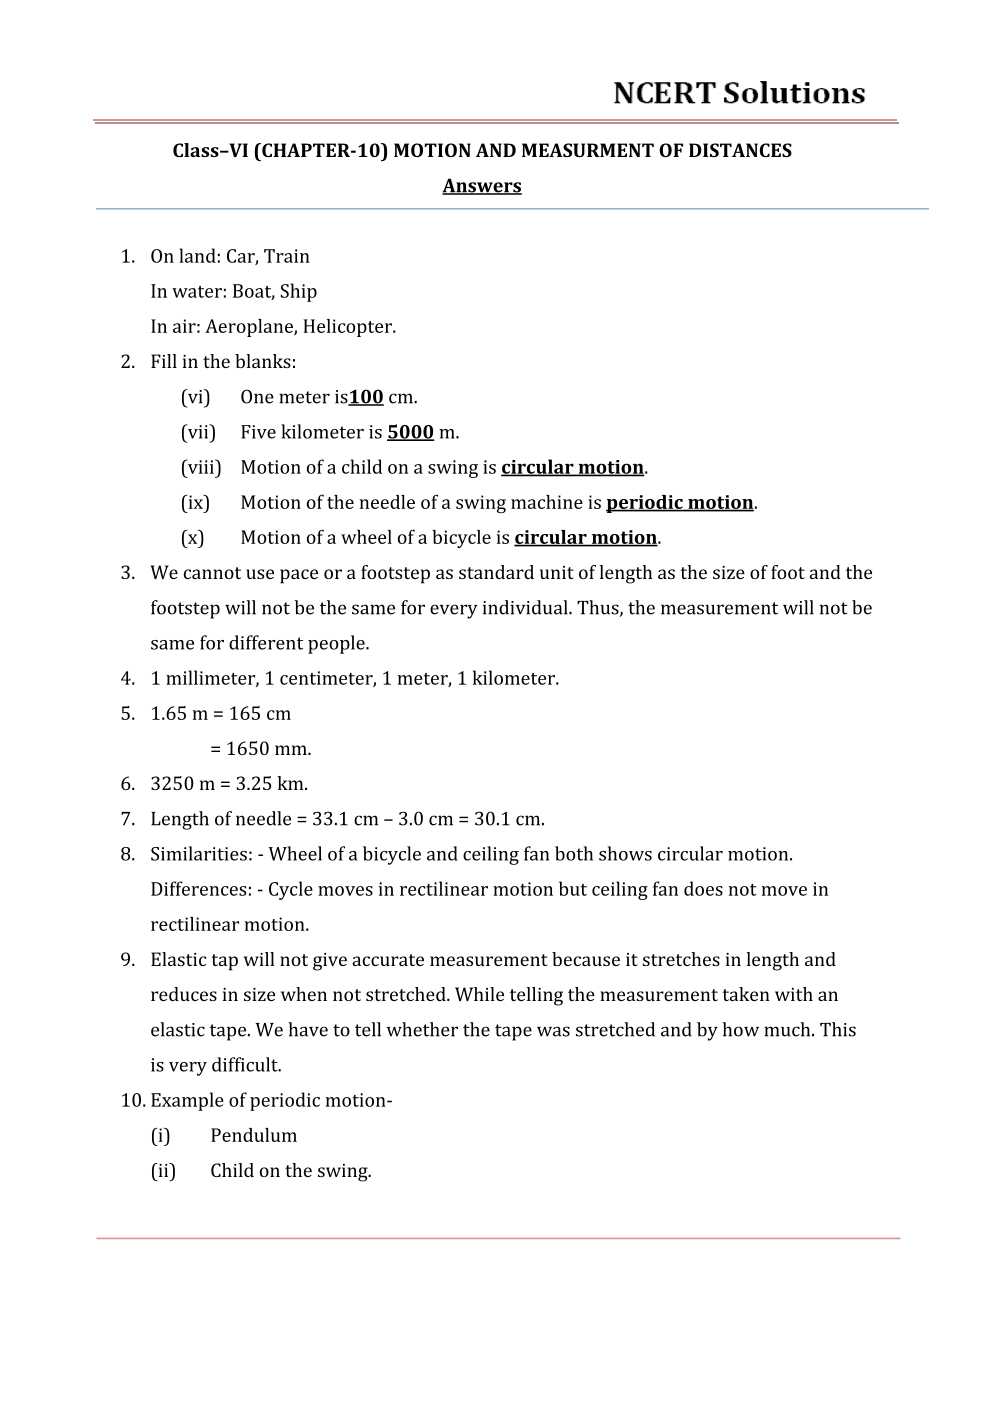 NCERT Solutions For Class 6 Science Chapter 10